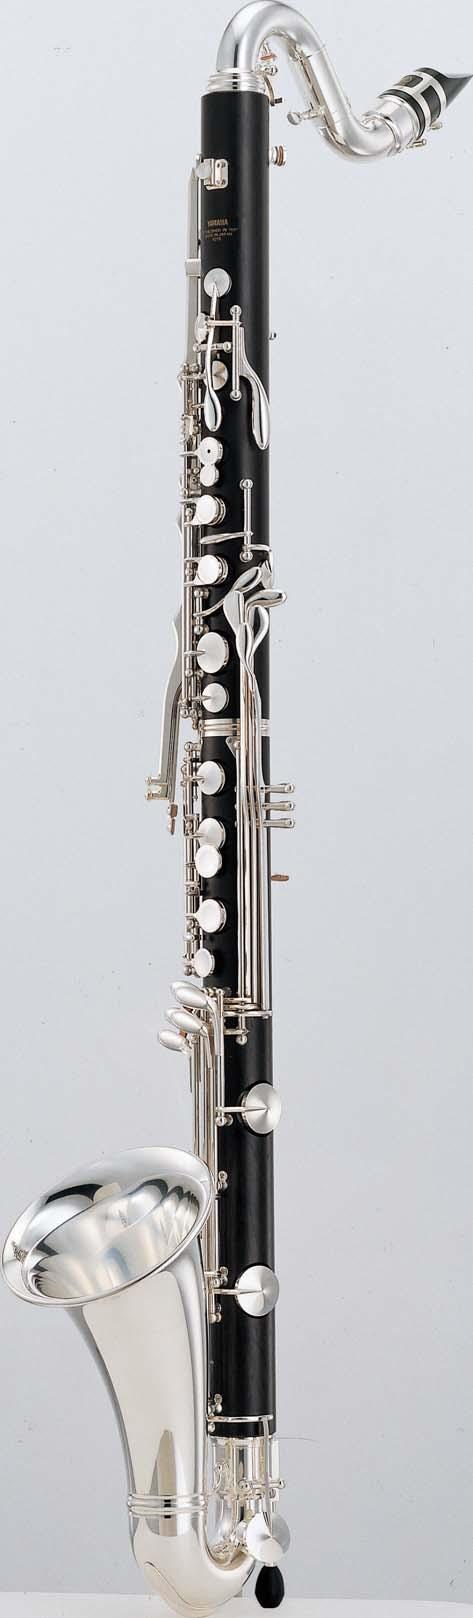 Student B BASS CLARINET YCL-221II Range to low E Matte finish ABS resin body 20 keys, 7 covered